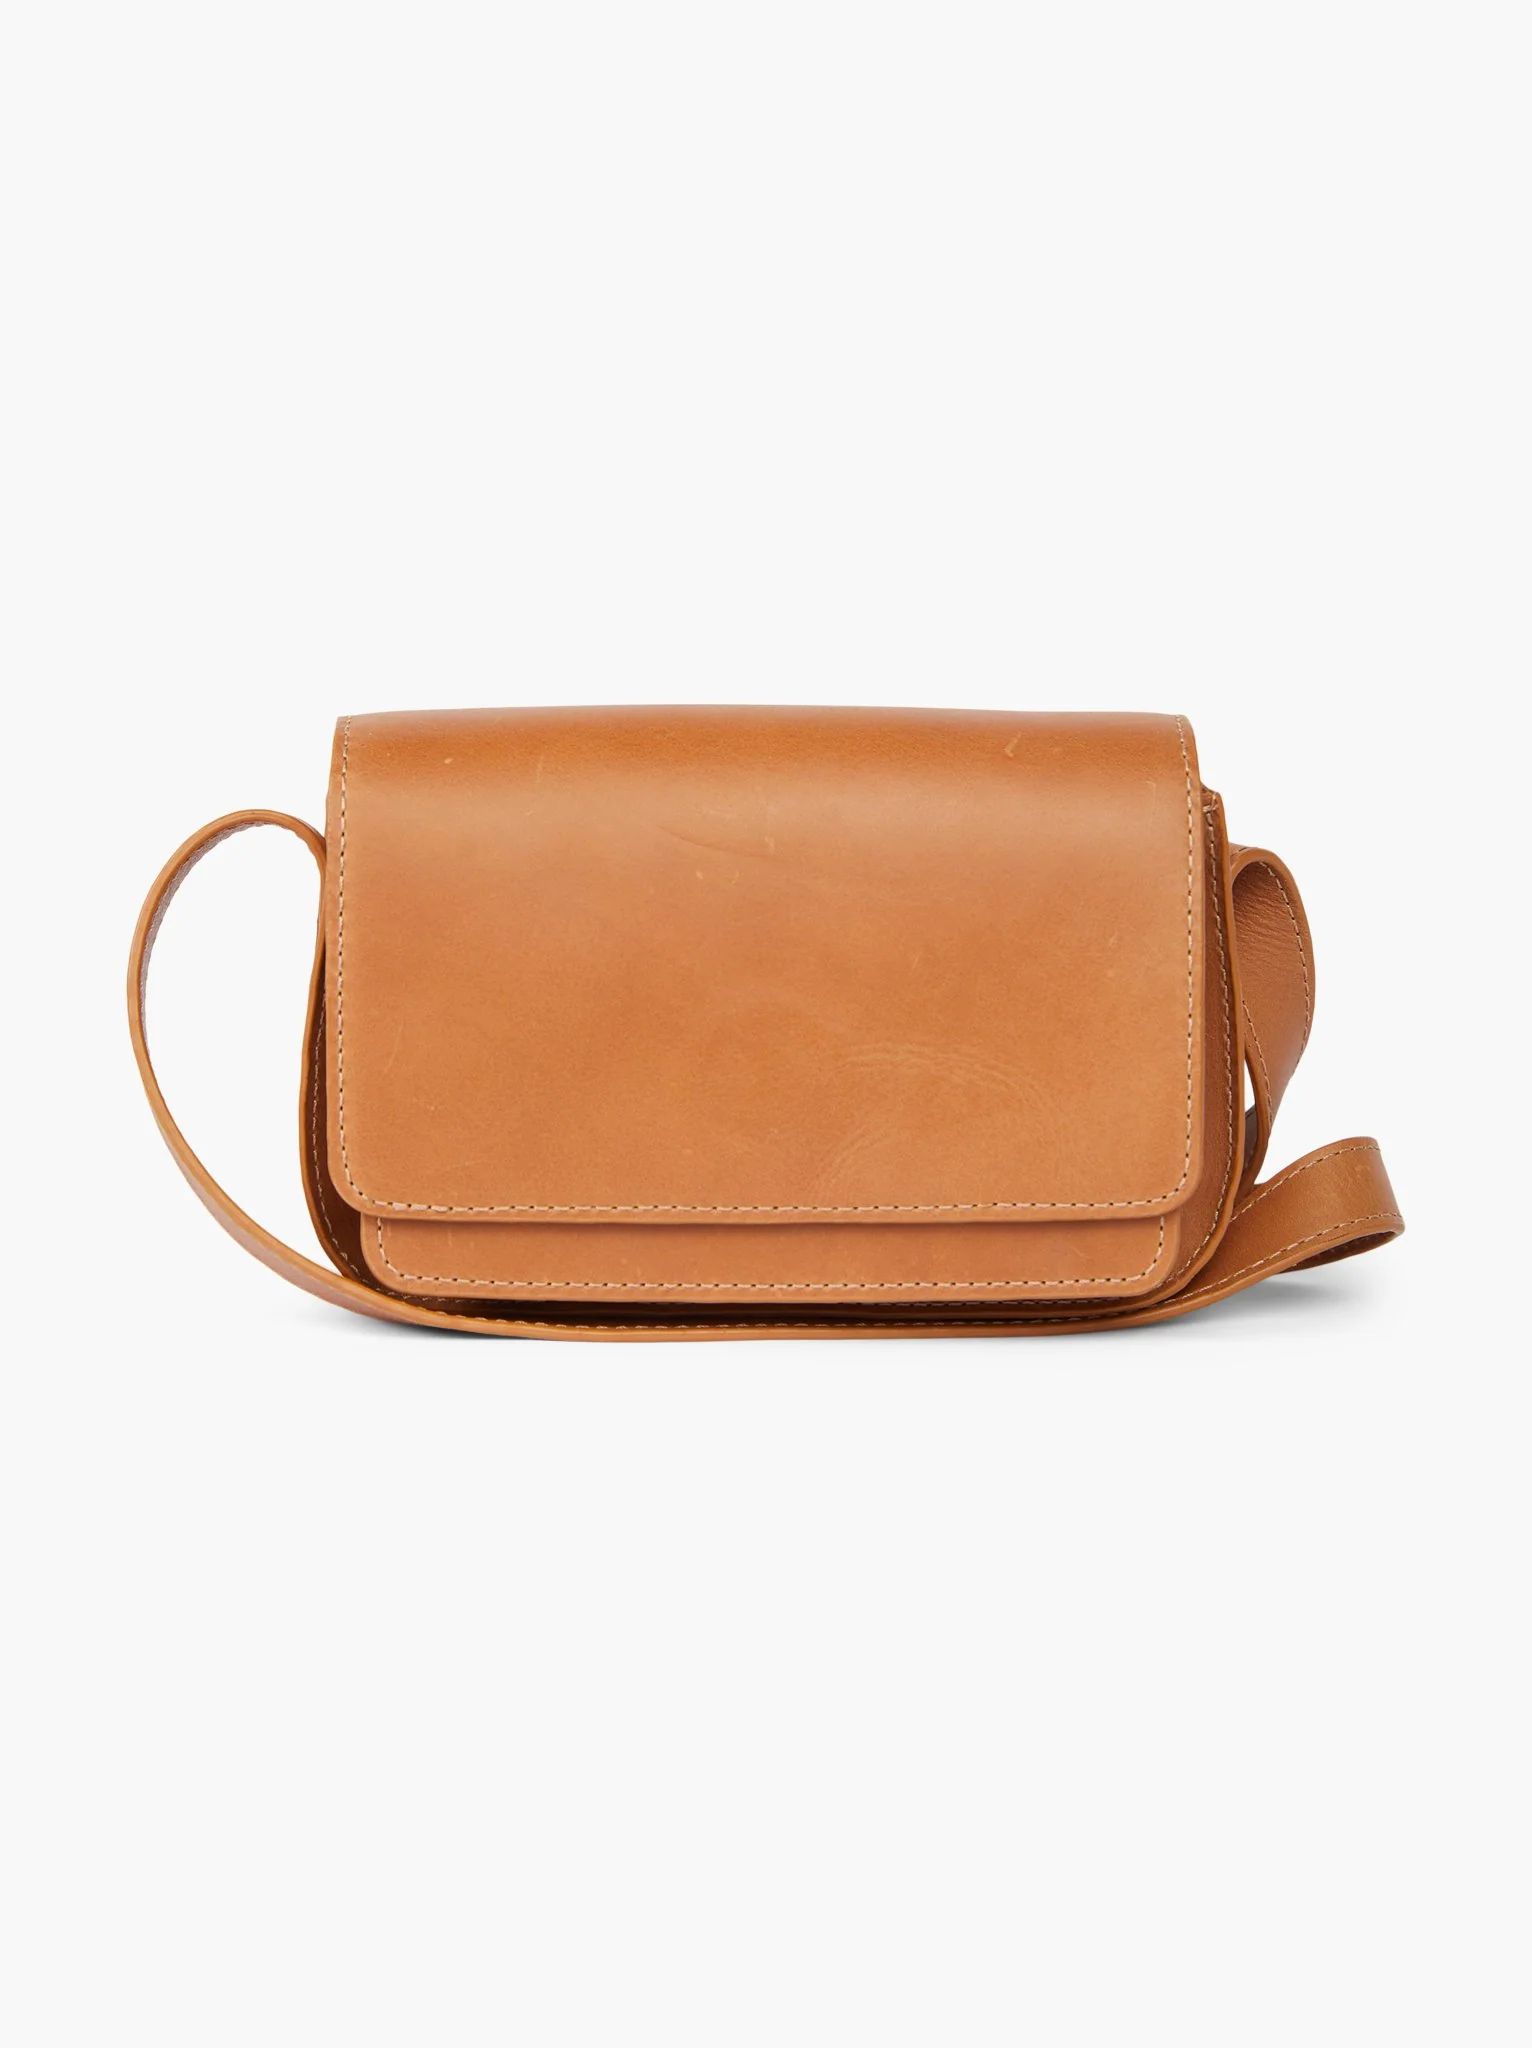 Gessi Crossbody | ABLE Clothing